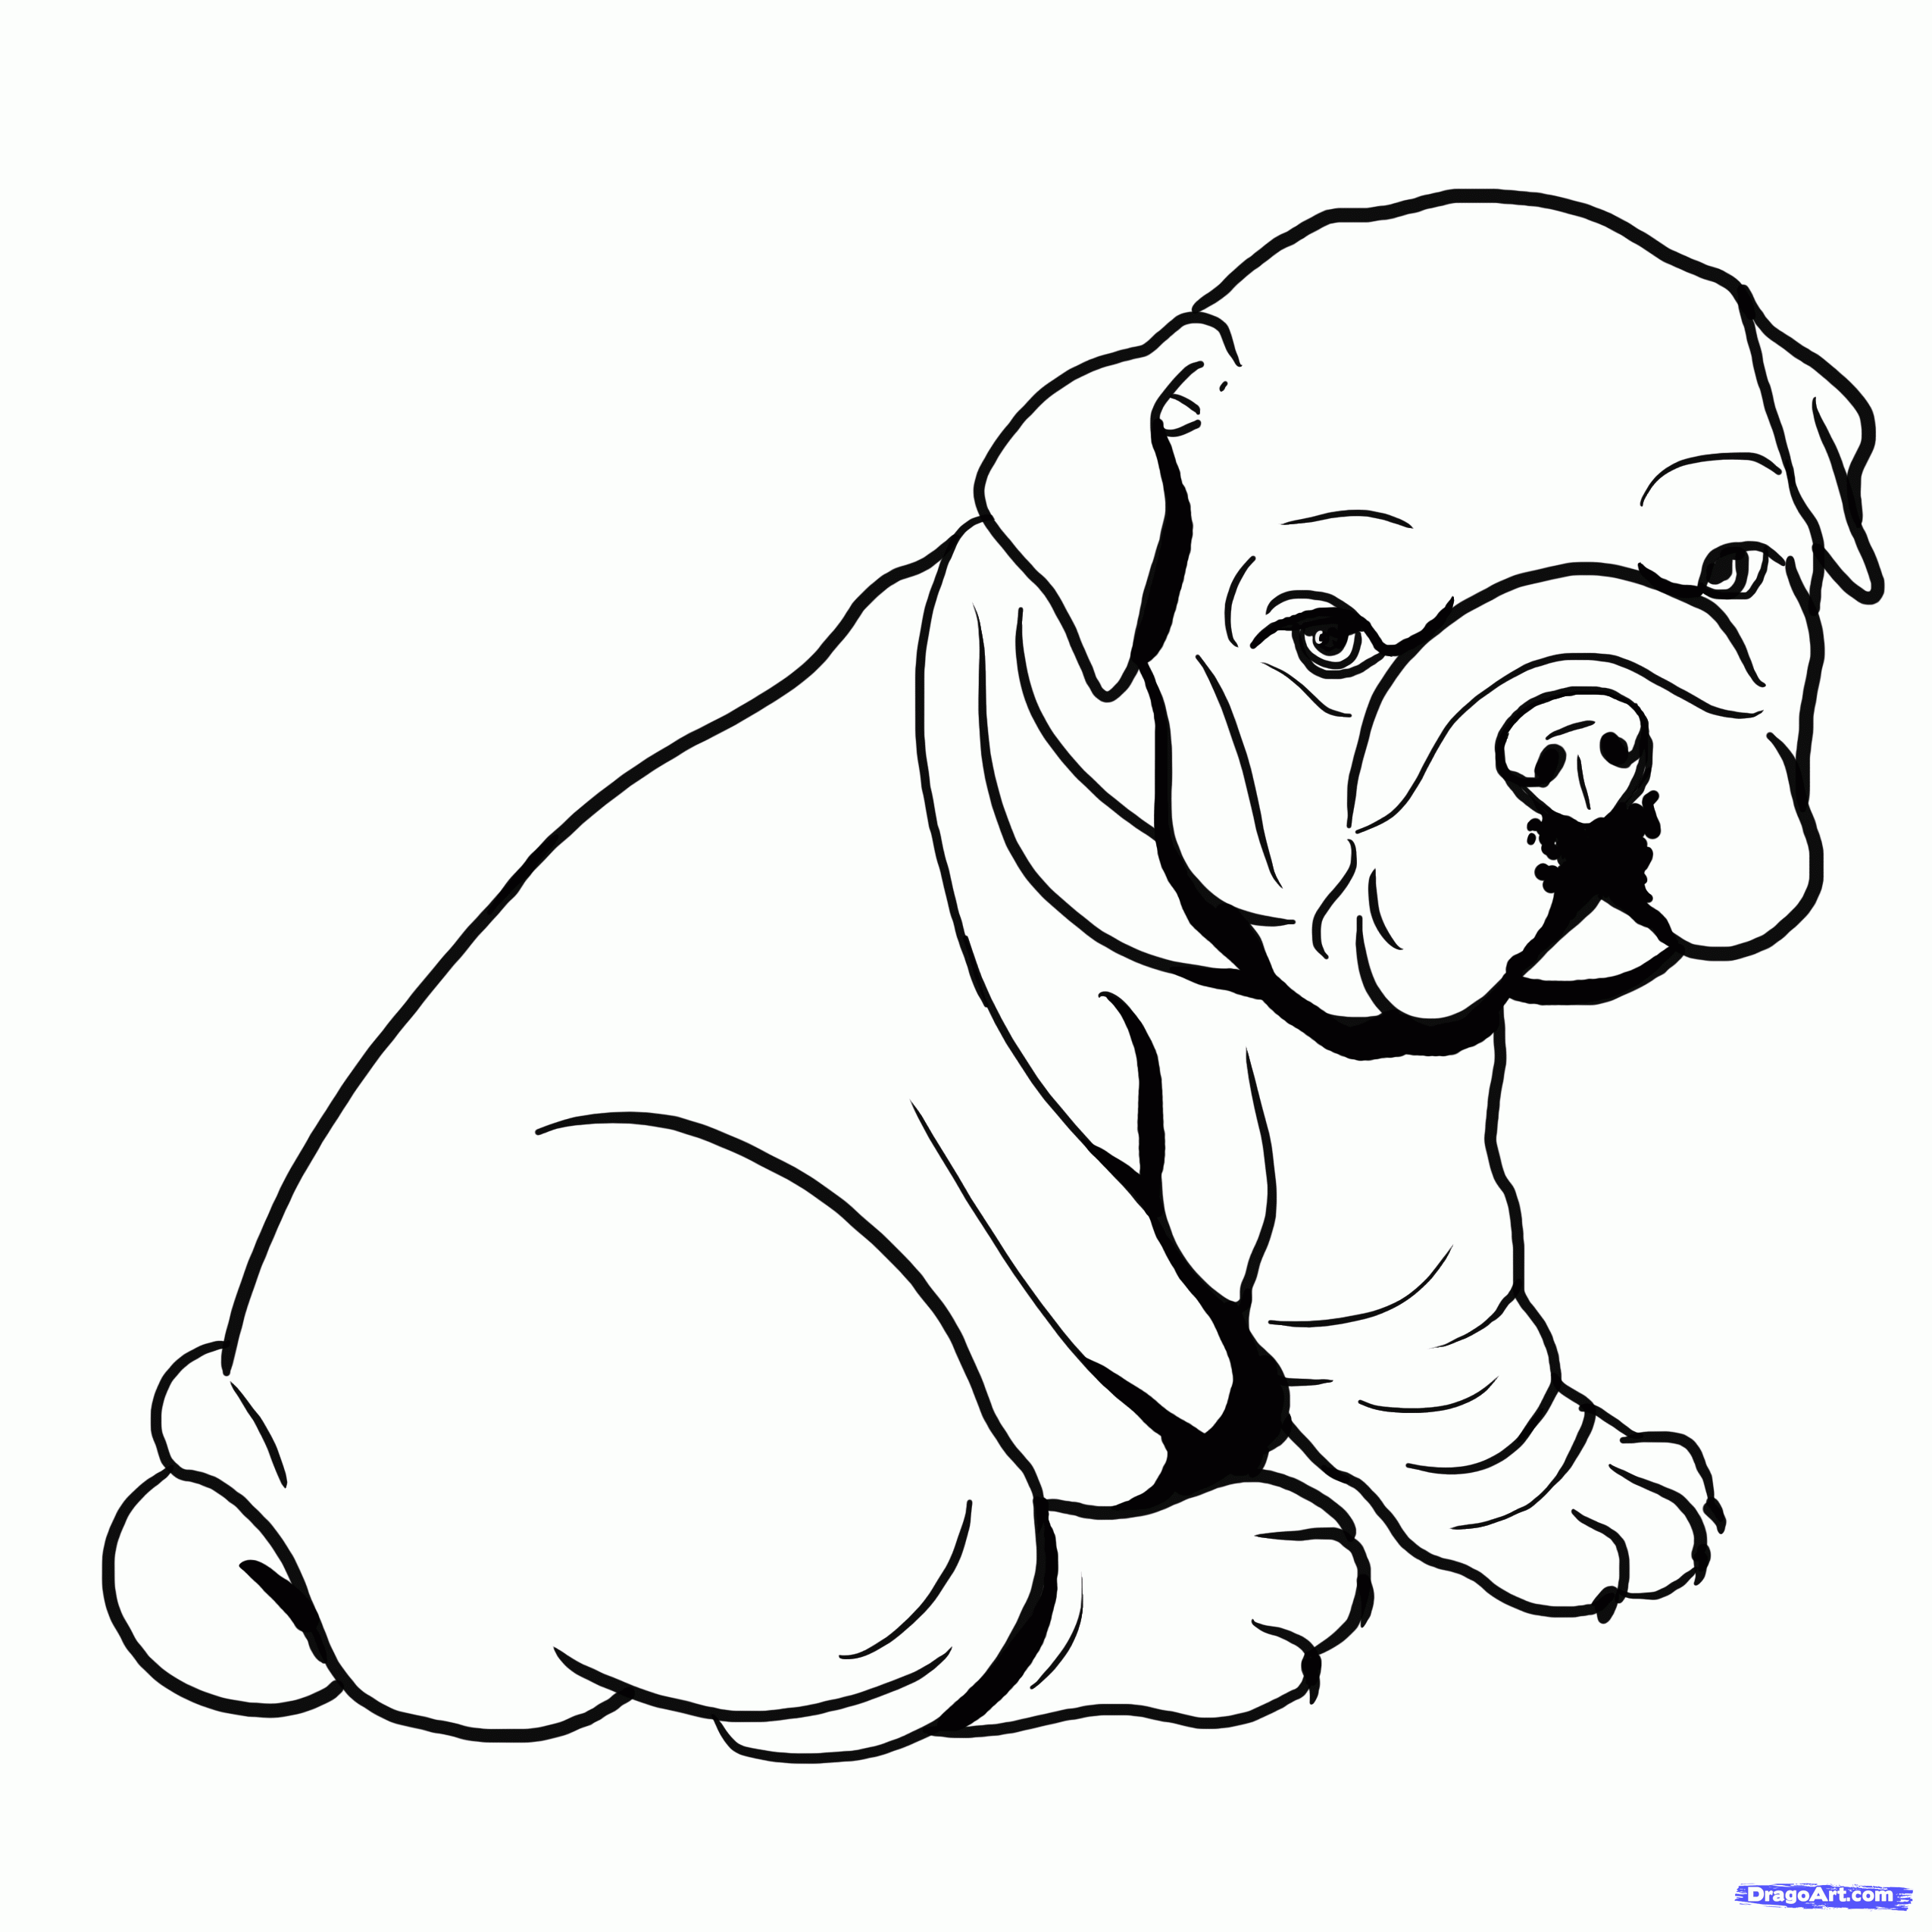 english-bulldog-page-for-kids-and-for-adults-coloring-home